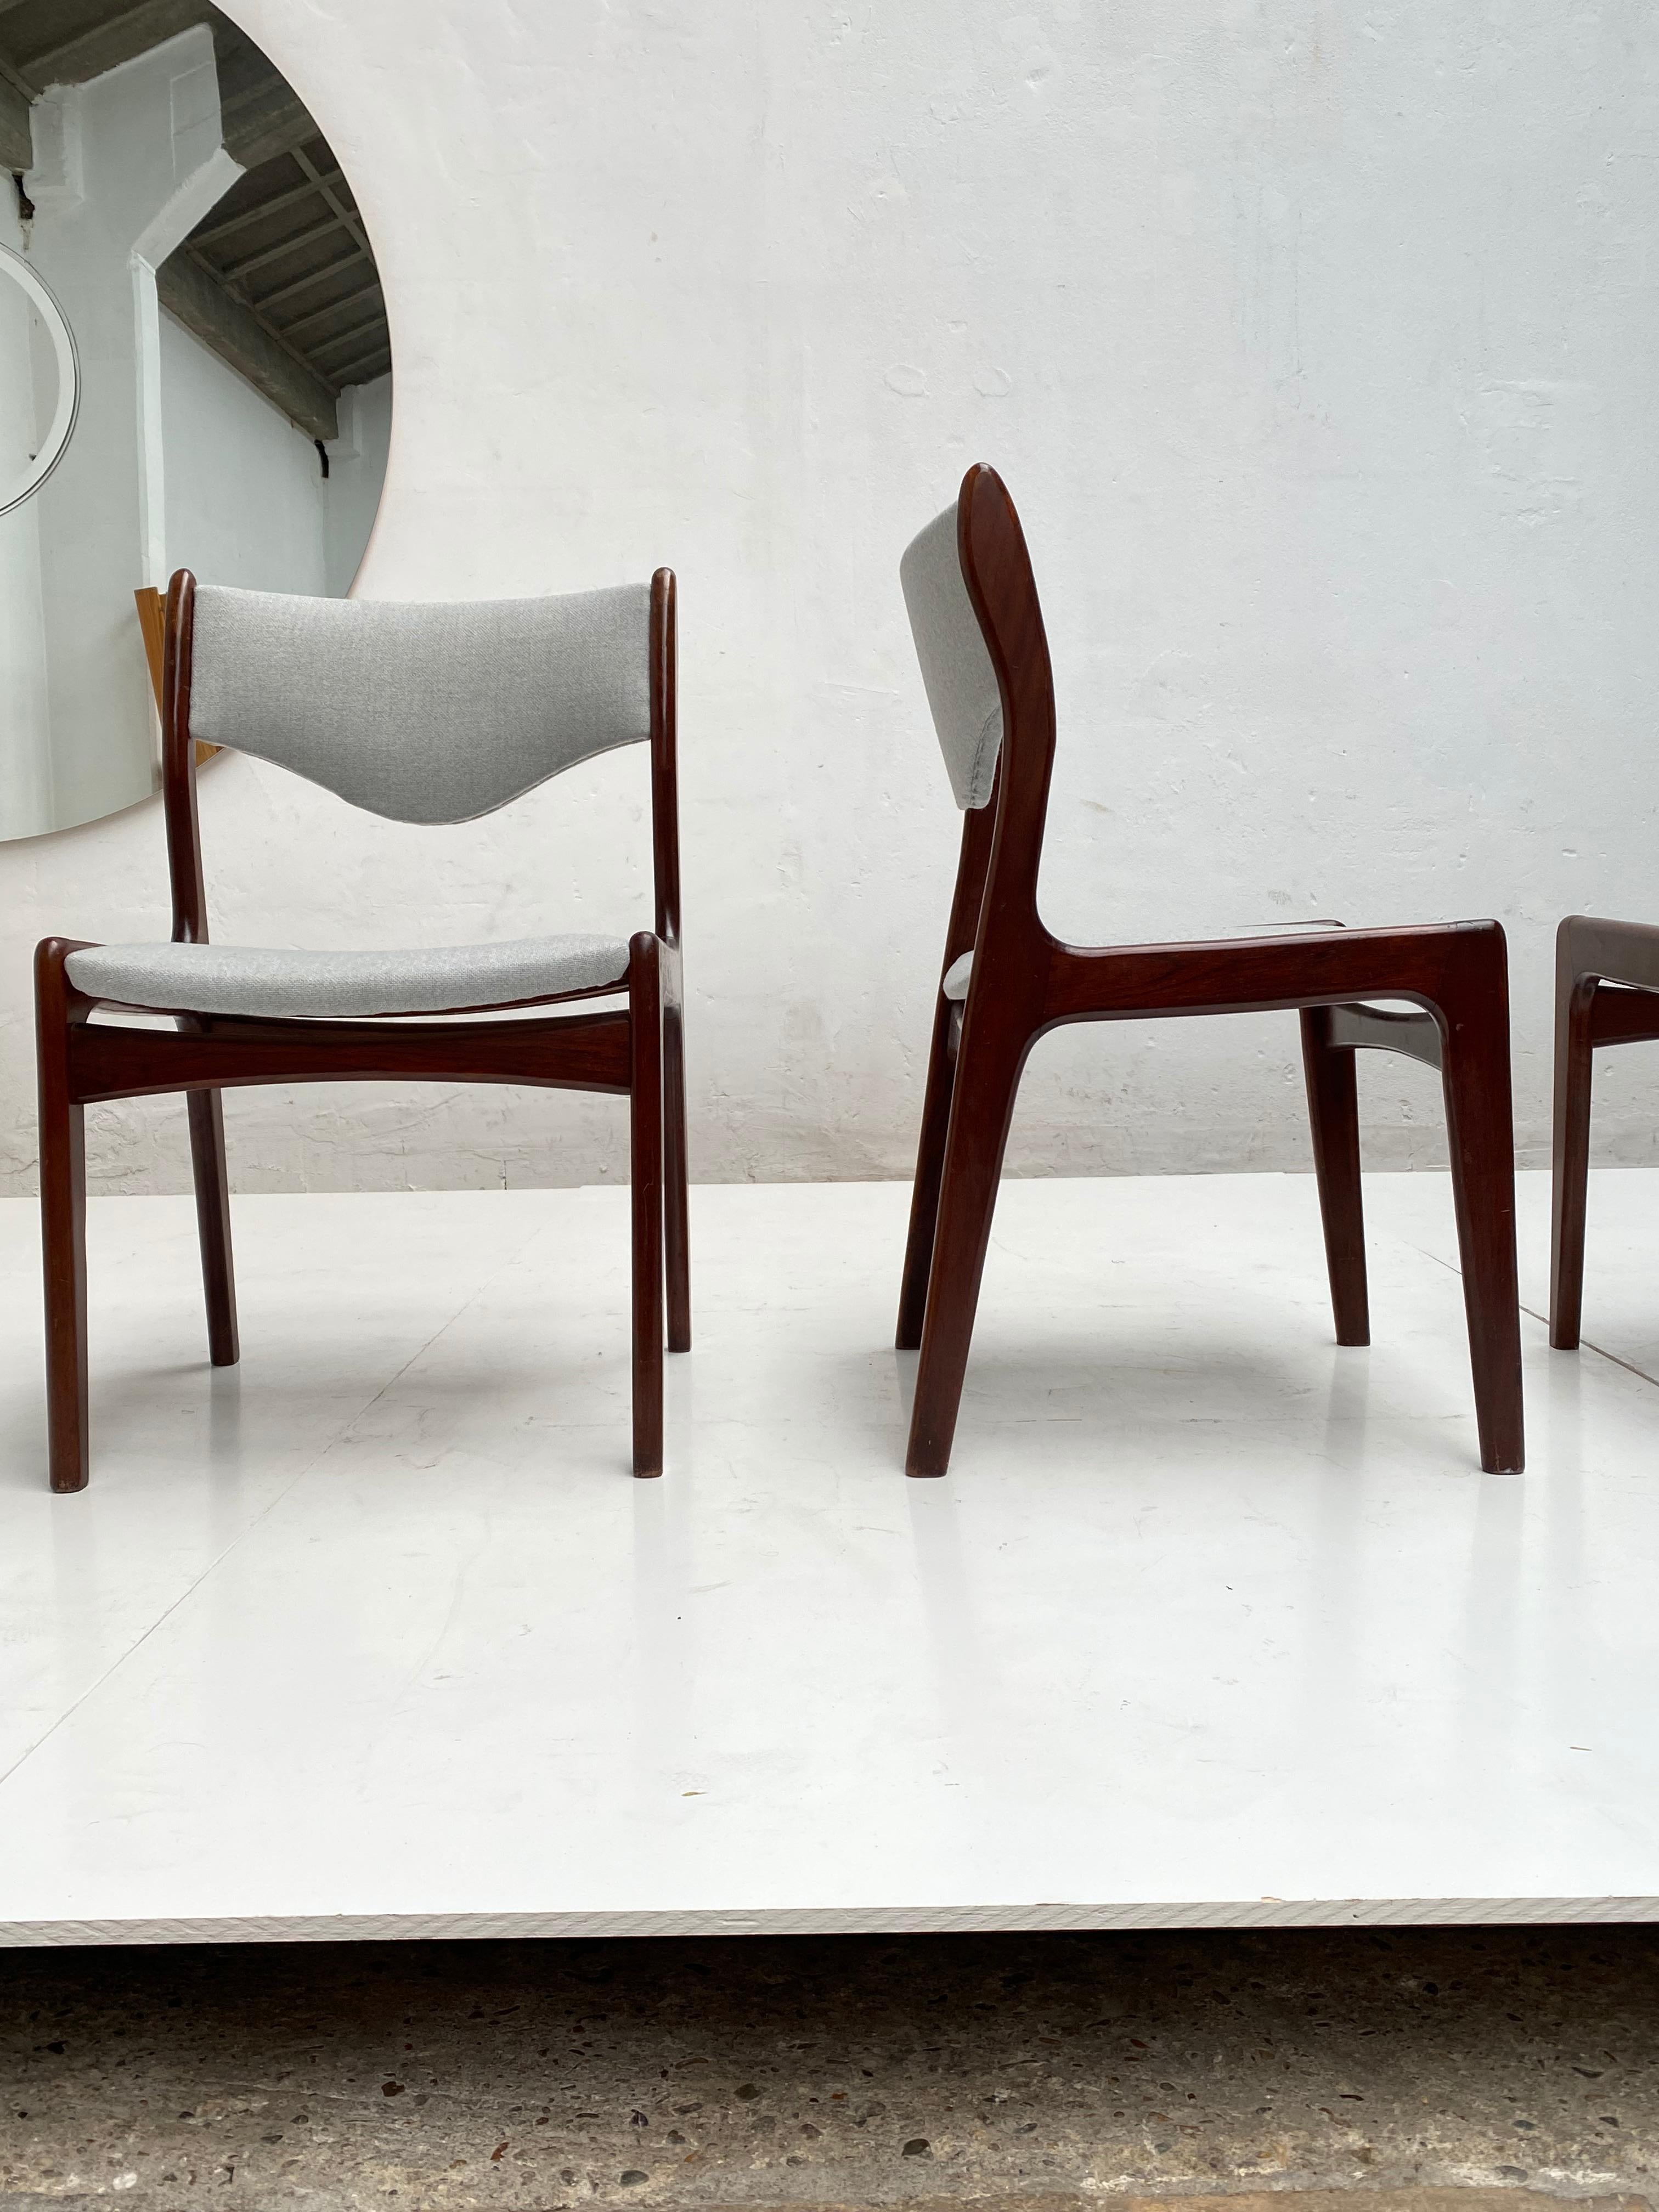 Johannes Andersen Set of 4 Solid Teak Dining Chairs produced by Mahjongg, 1960's For Sale 4